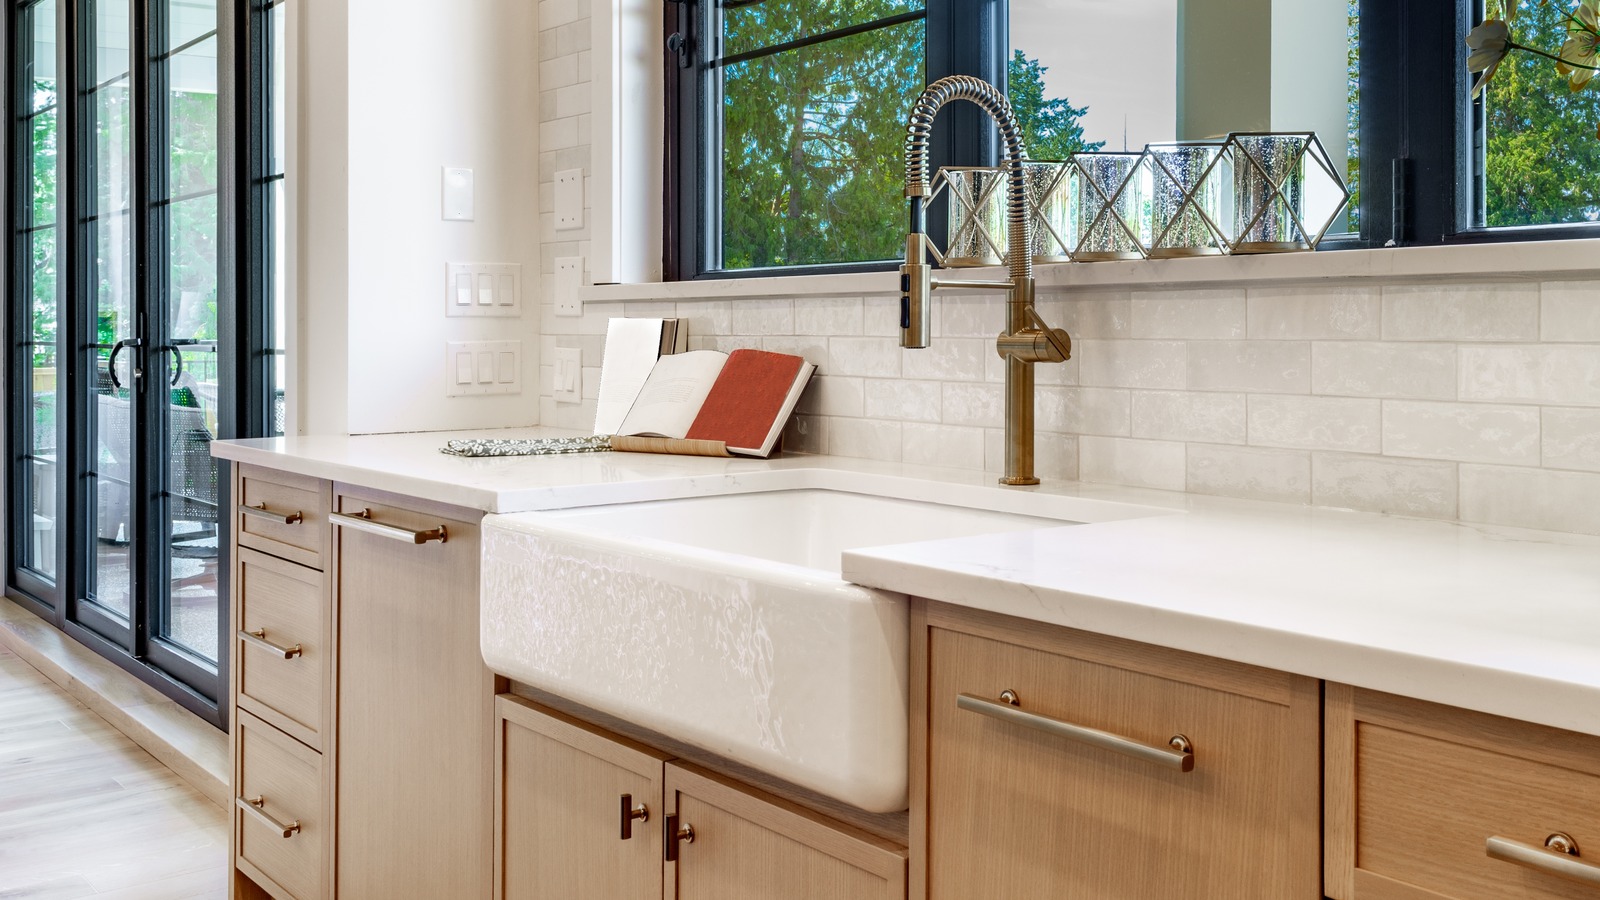 The Best Type Of Sink To Install In Your Hamptons-Style Kitchen – House Digest